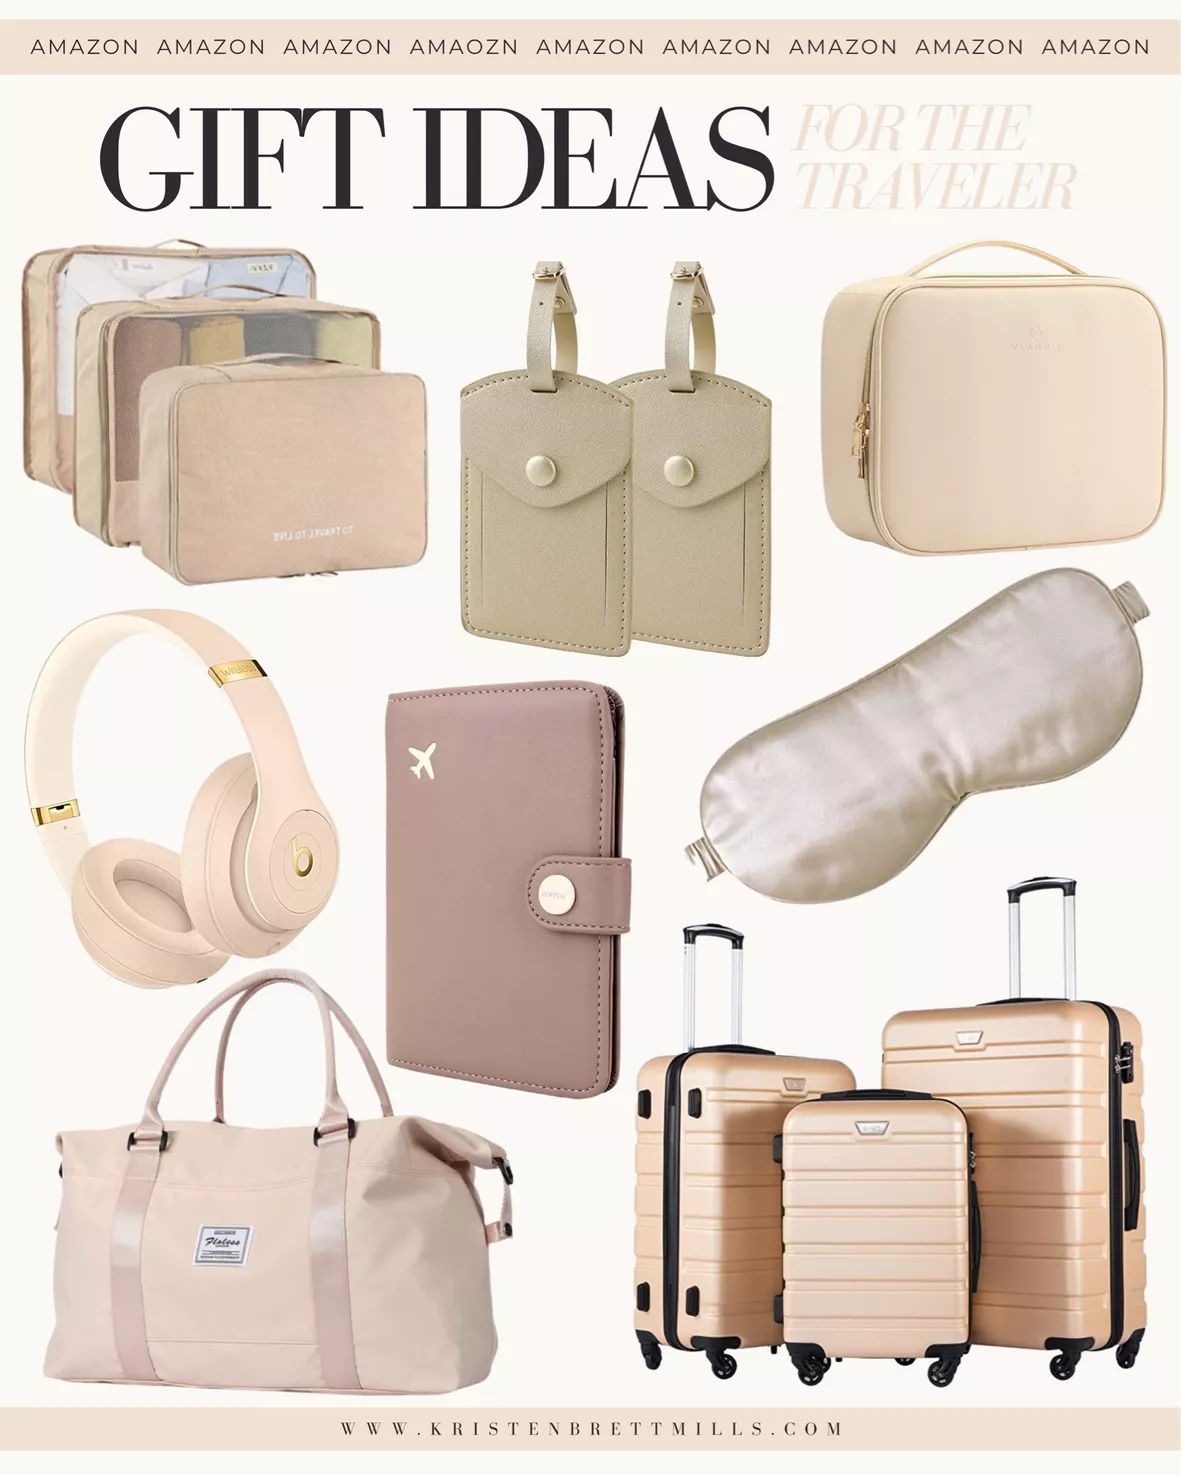 Christmas Gift Guide, Gifts for Girls, Sports, Style